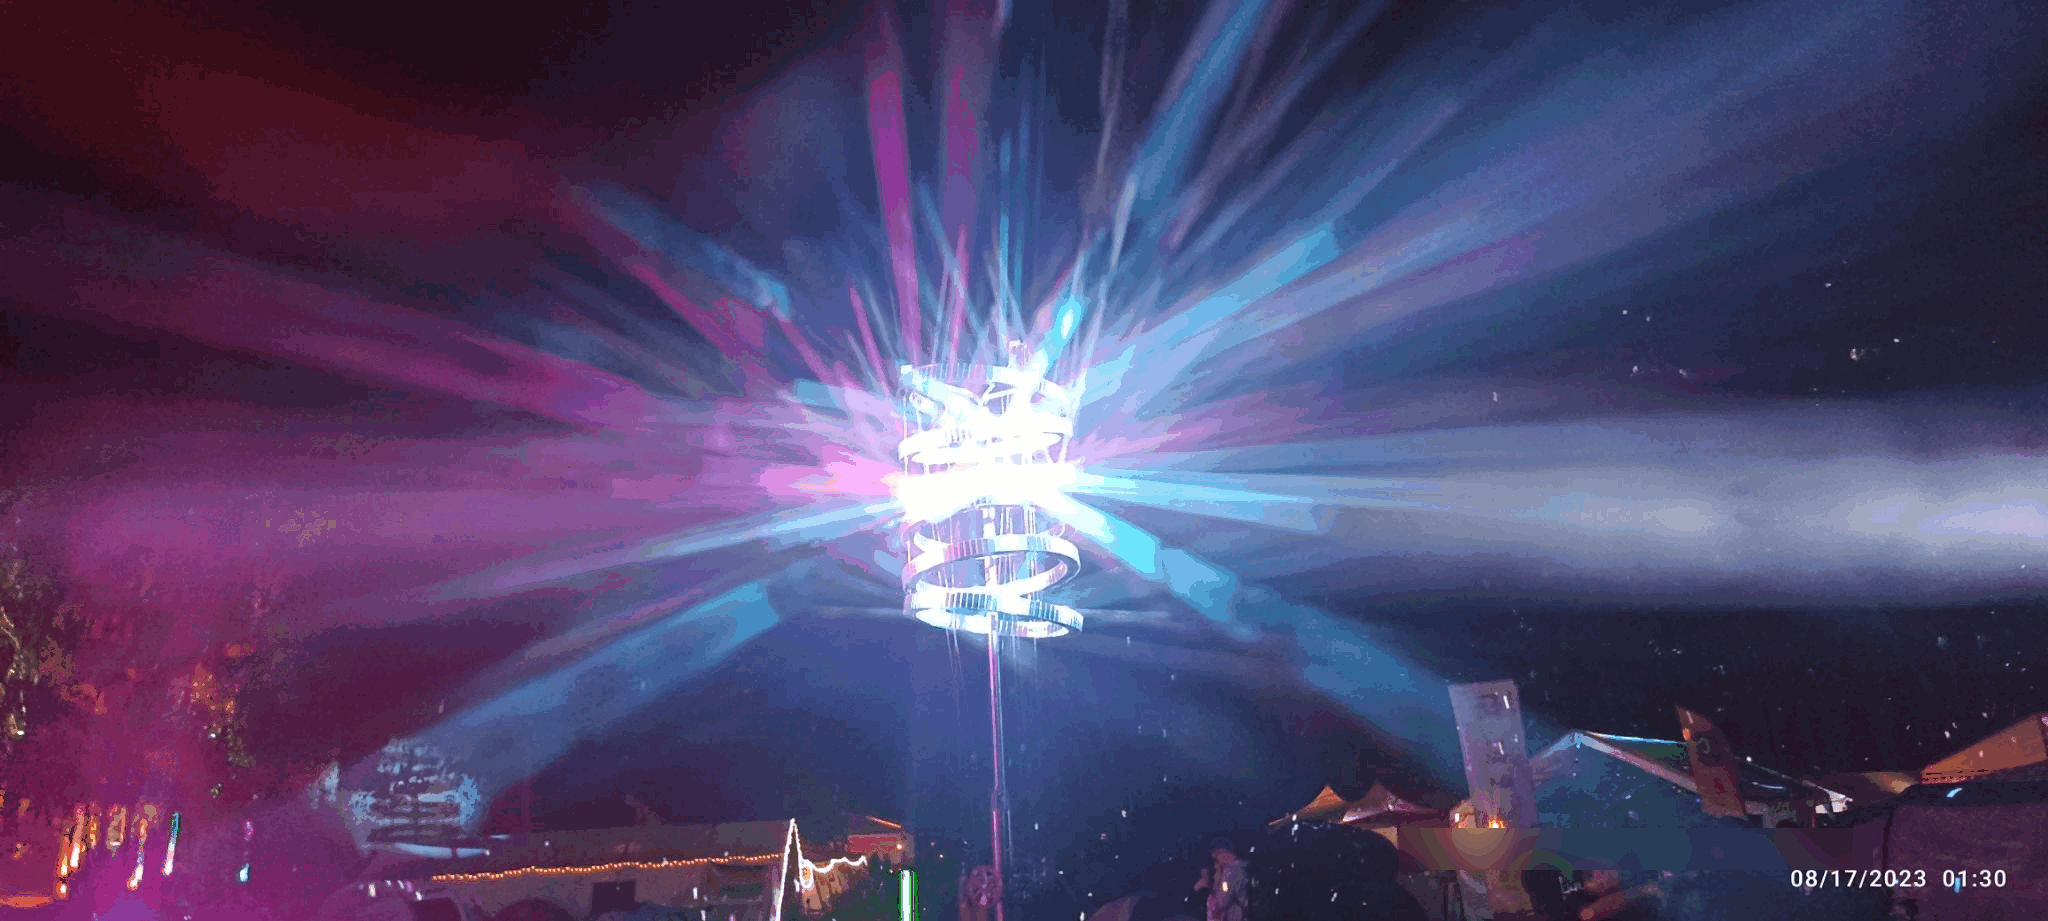 A tower of mirrors being hit by purple/blue and pink light beams, reflecting them all over the place